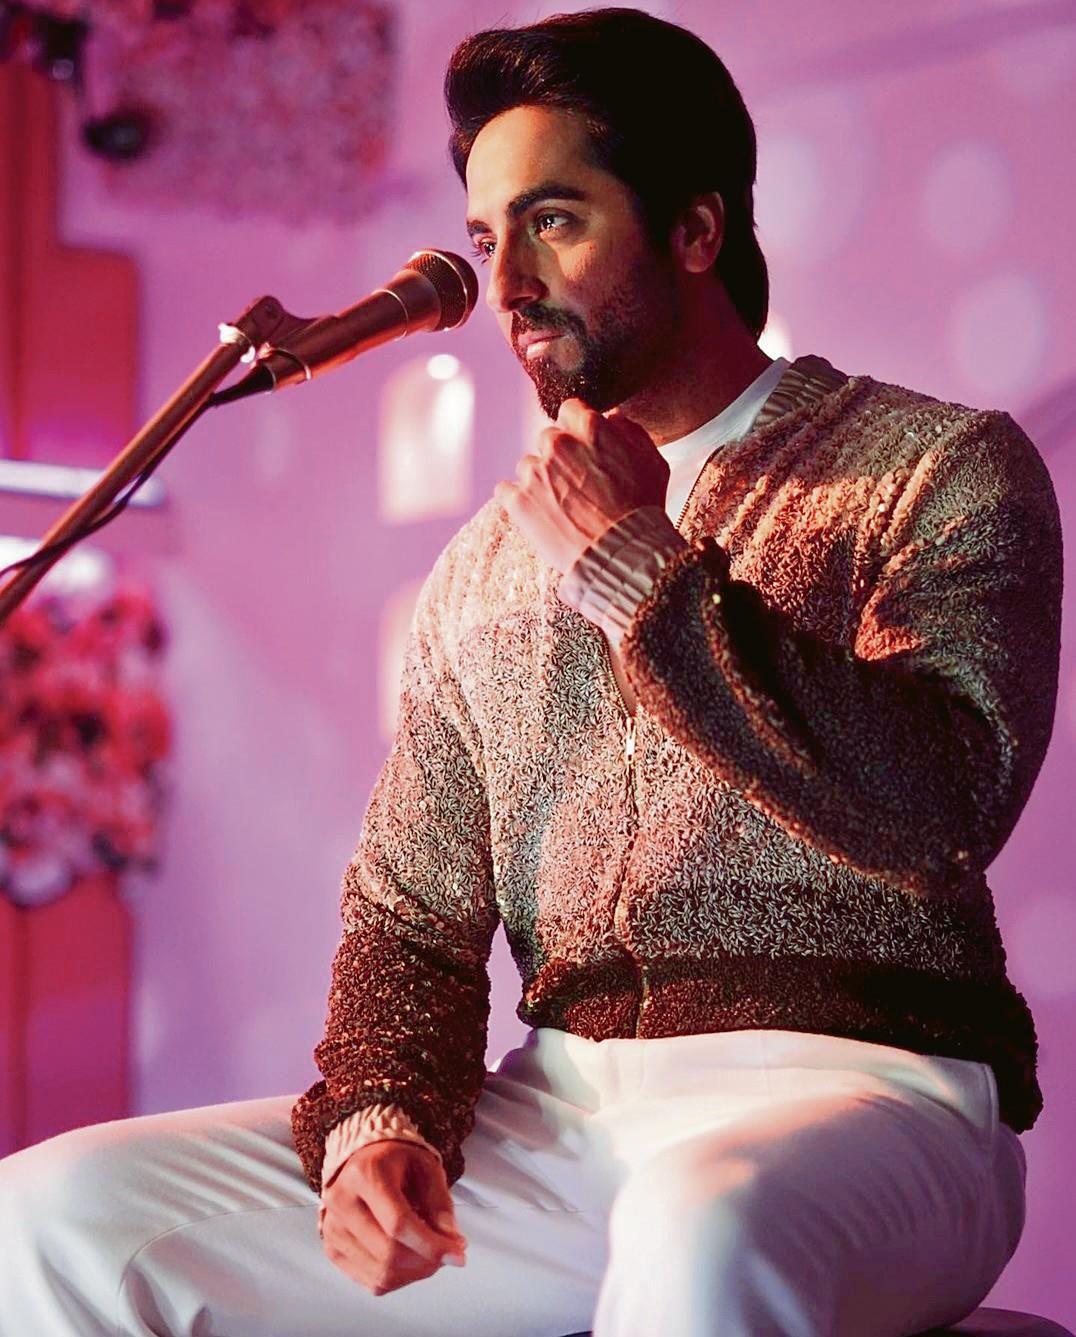 •	Meet actors, including Ayushmann Khurrana and Alia Bhatt, who are endowed with musical talents on and off screen